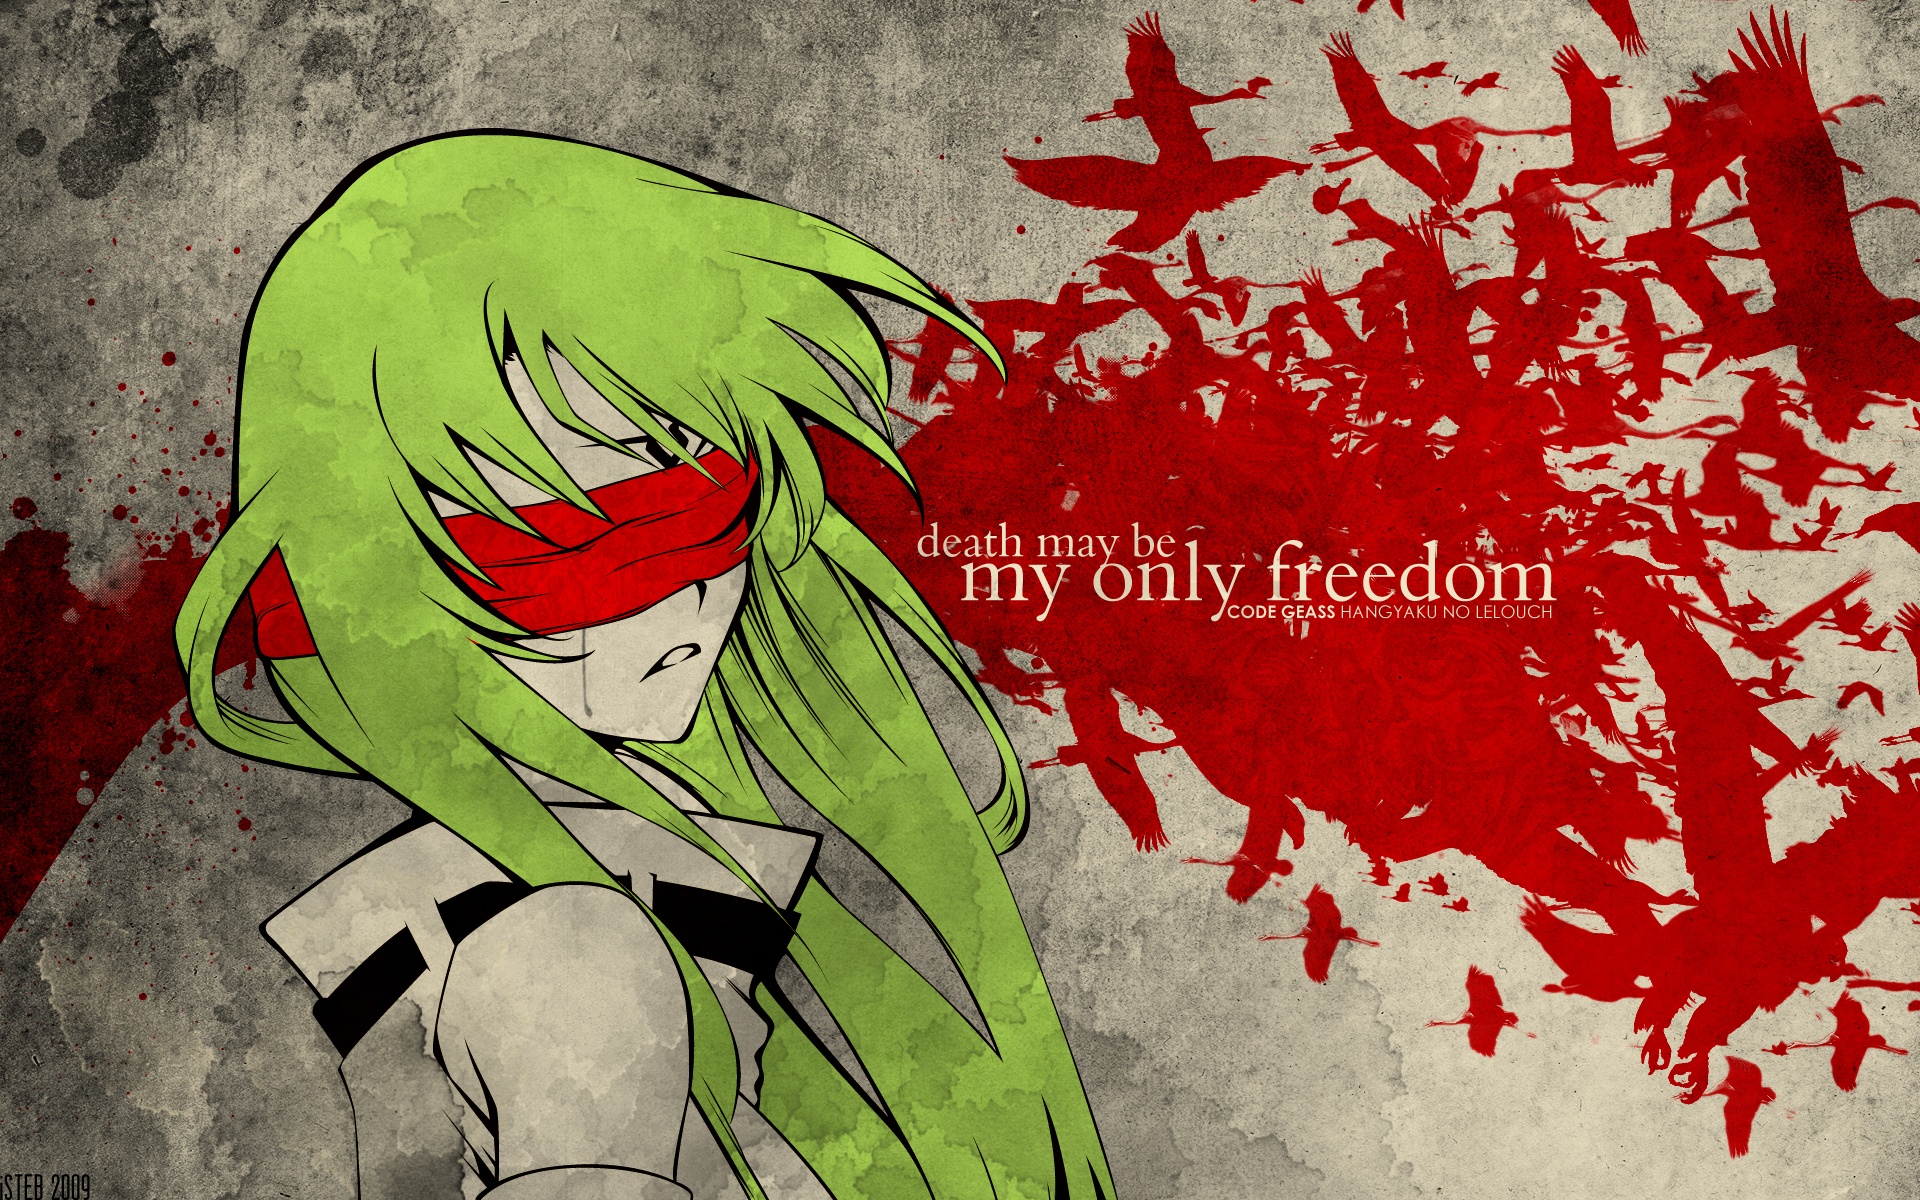 Green-haired anime character with a sad expression: C.C. from Code Geass.